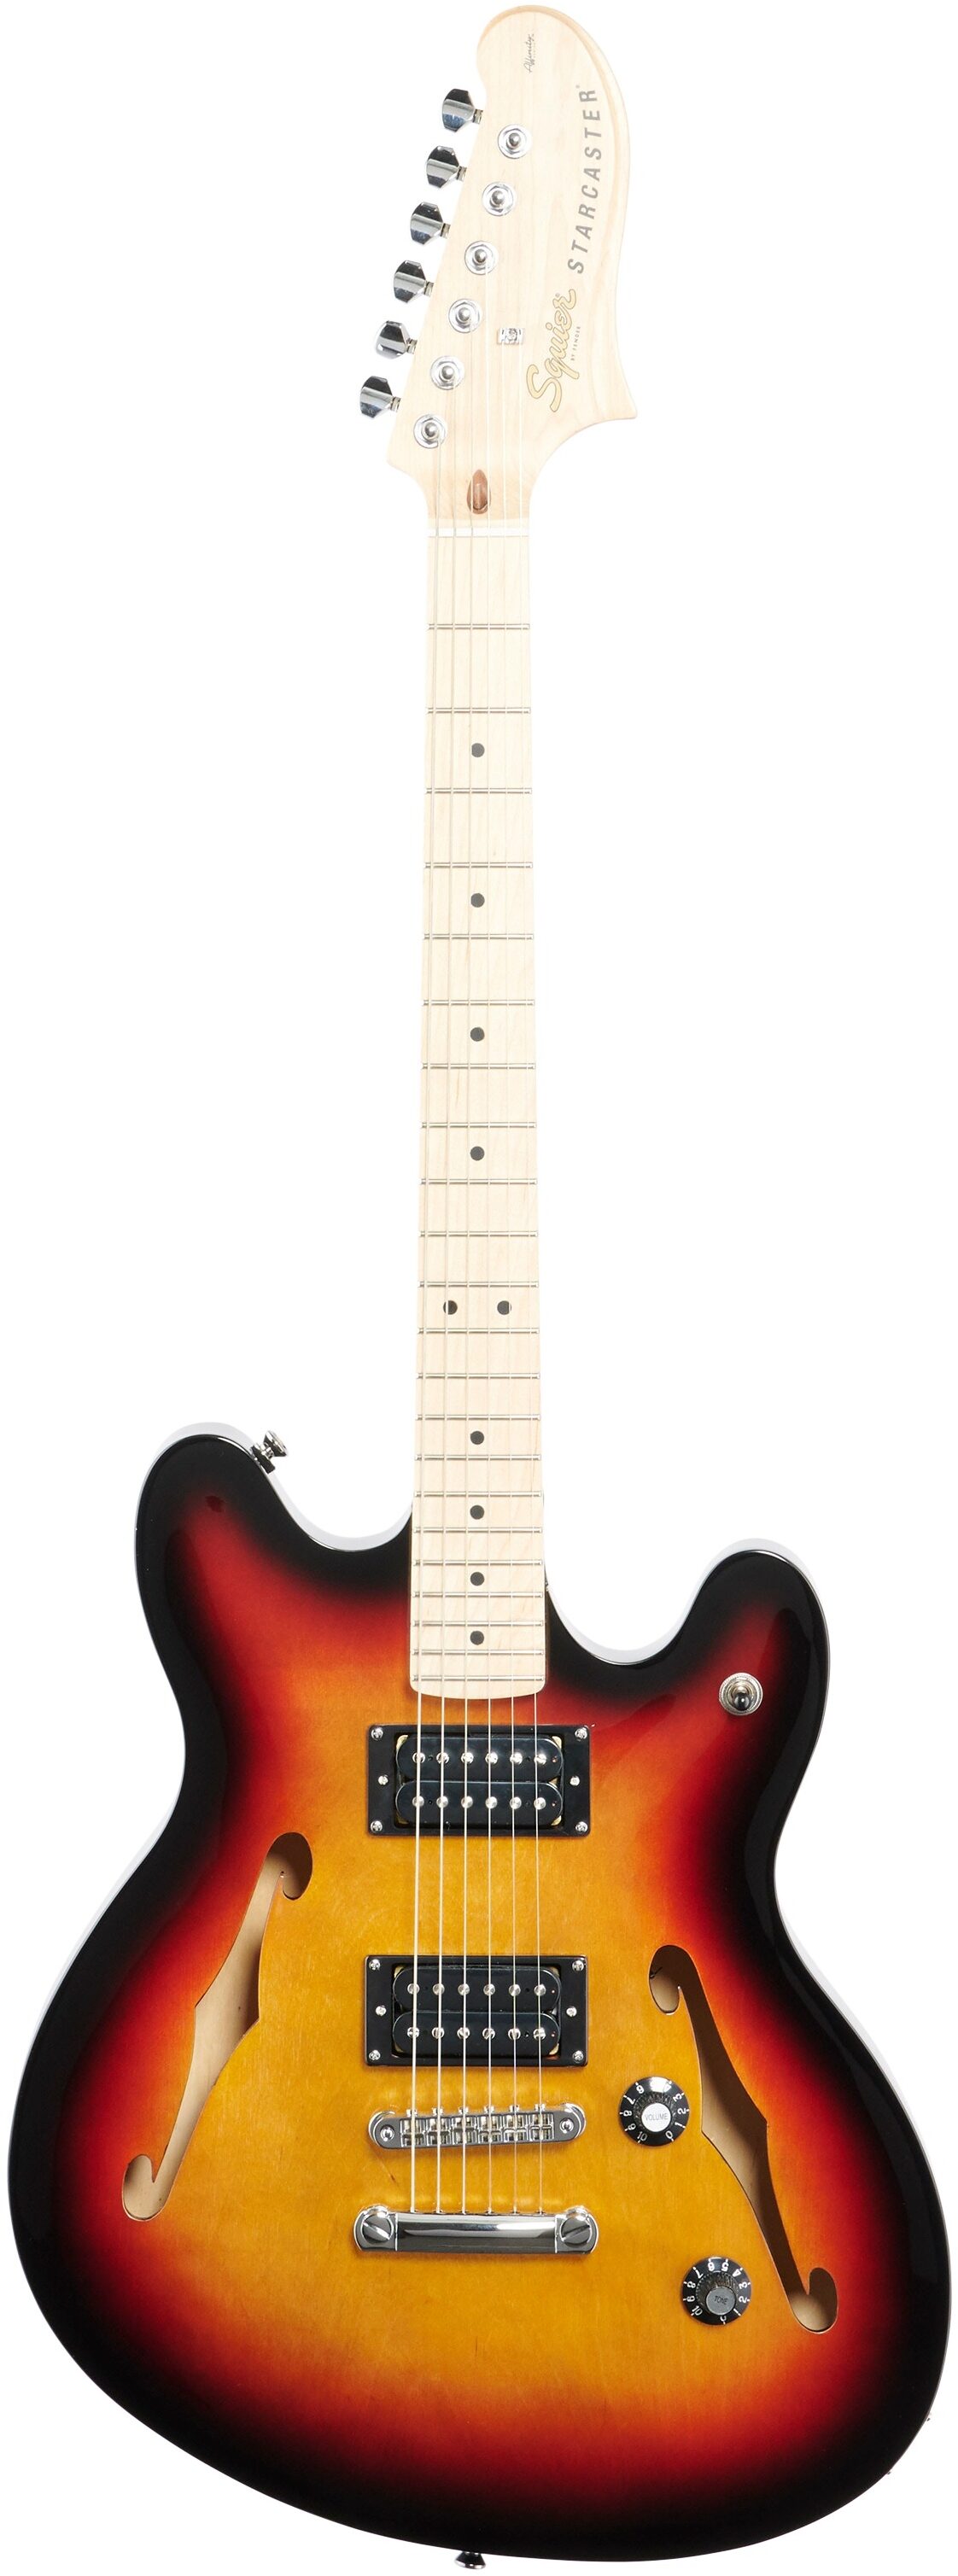 Squier Affinity Starcaster Electric Guitar, Maple Fingerboard